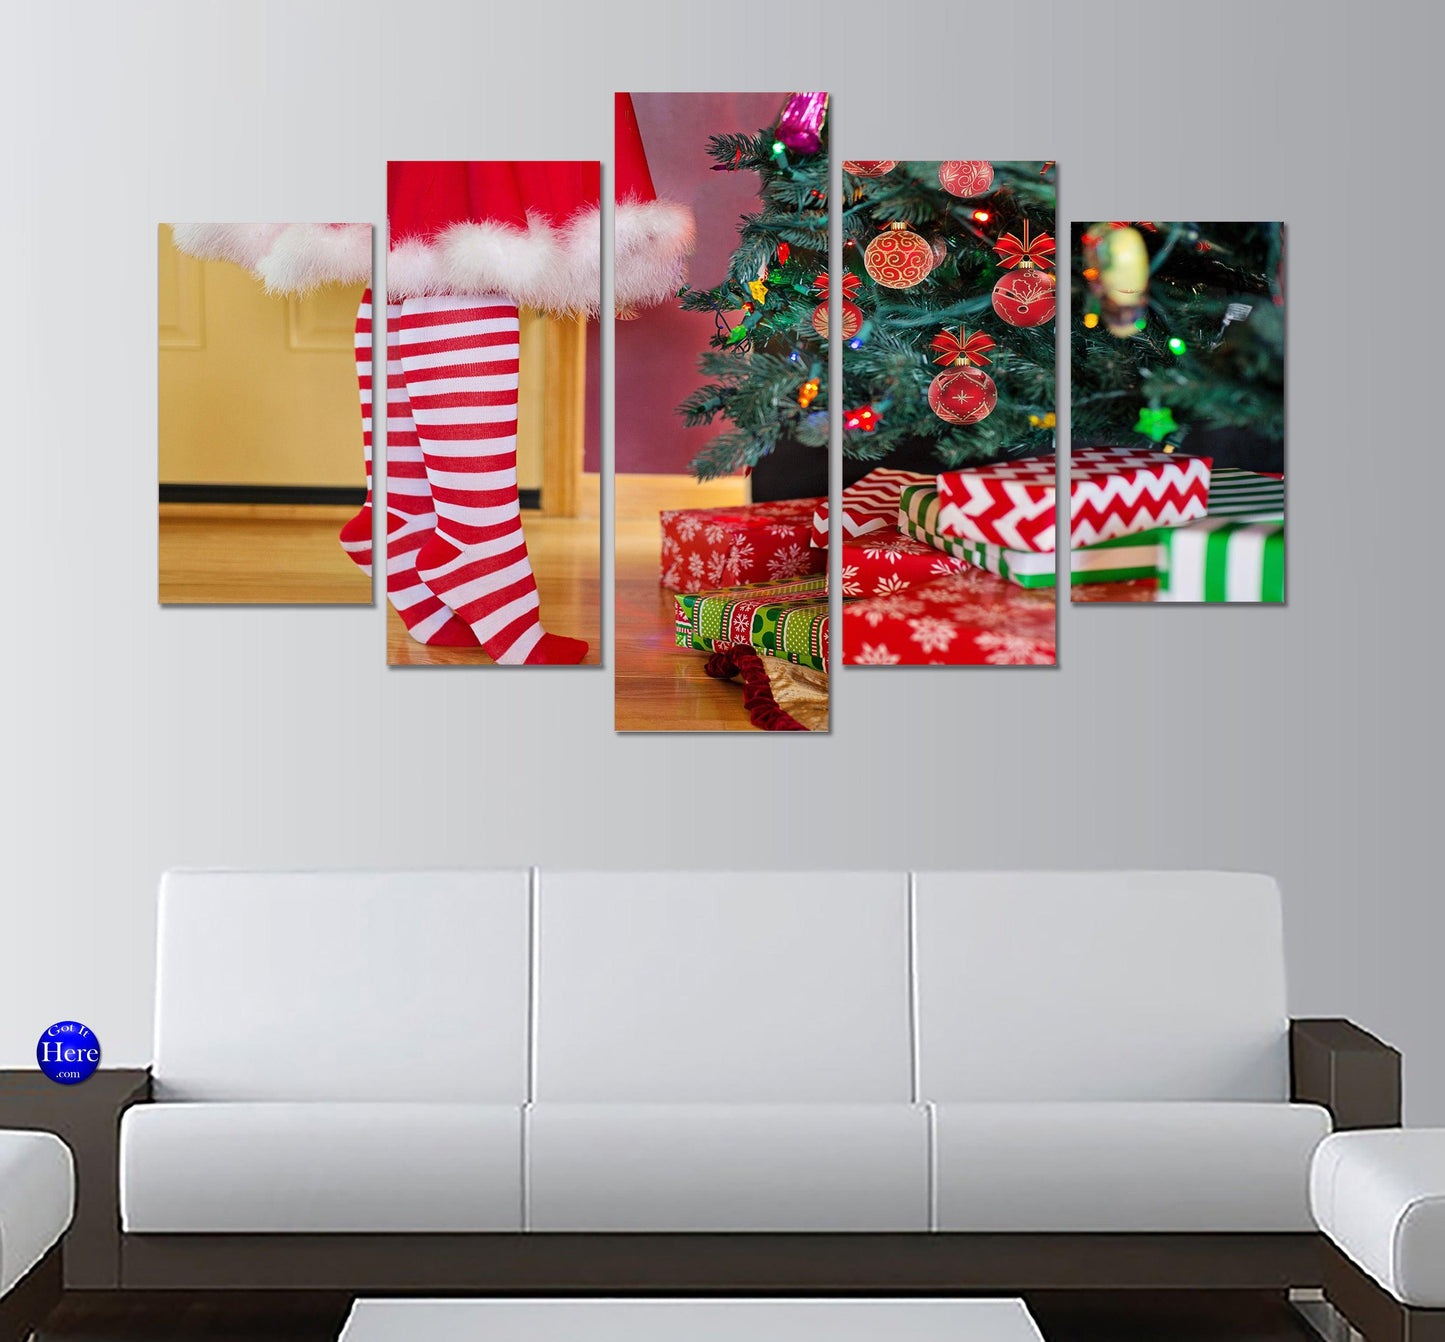 Mrs. Claus Trimming The Tree 5 Panel Canvas Print Wall Art - GotItHere.com